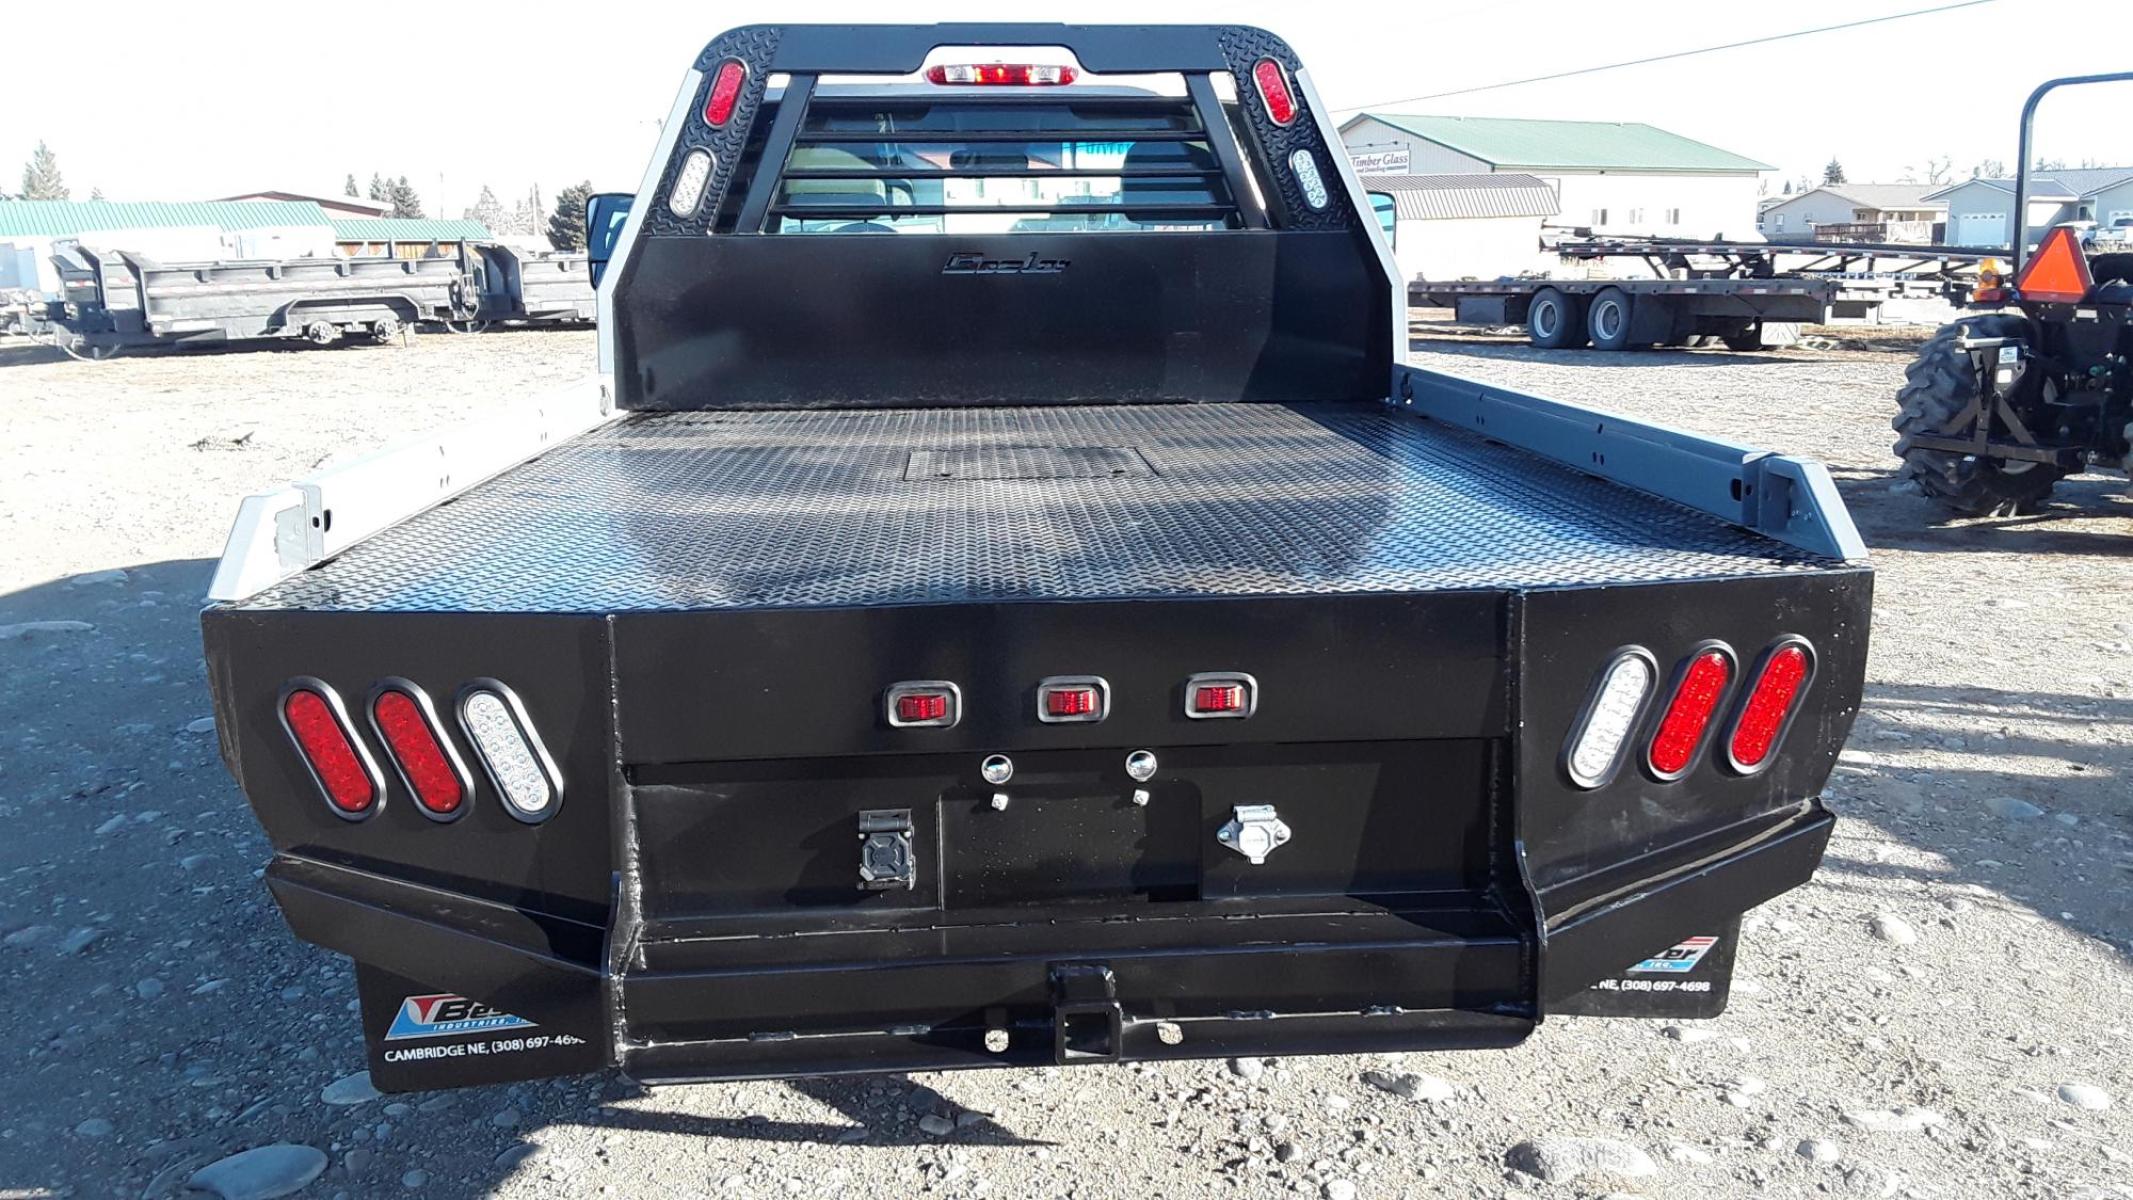 2022 Black Besler Flatbed , located at 310 West 1st Ave, Big Timber, MT, 59011, (406) 860-8510, 45.833511, -109.957809 - ALL NEW BESLER 6000 SERIES FLATBED, GN HITCH W- 30K TOW BALL, REAR RECEIVER HITCH, 7 ROUND TRAILER PLUGS, LED LIGHTS, STAKE POCKETS-RUB RAIL, TAPERED REAR. 7 X 7 FOR SHORT WHEEL BASE PU - $4,750.00. 7 X 81-2 FOR LONG WHEEL BASE PU - $4,750.00.	FOLD DOWN SIDES - ADD $200.00. INSTALLATION AVAIL - Photo #2